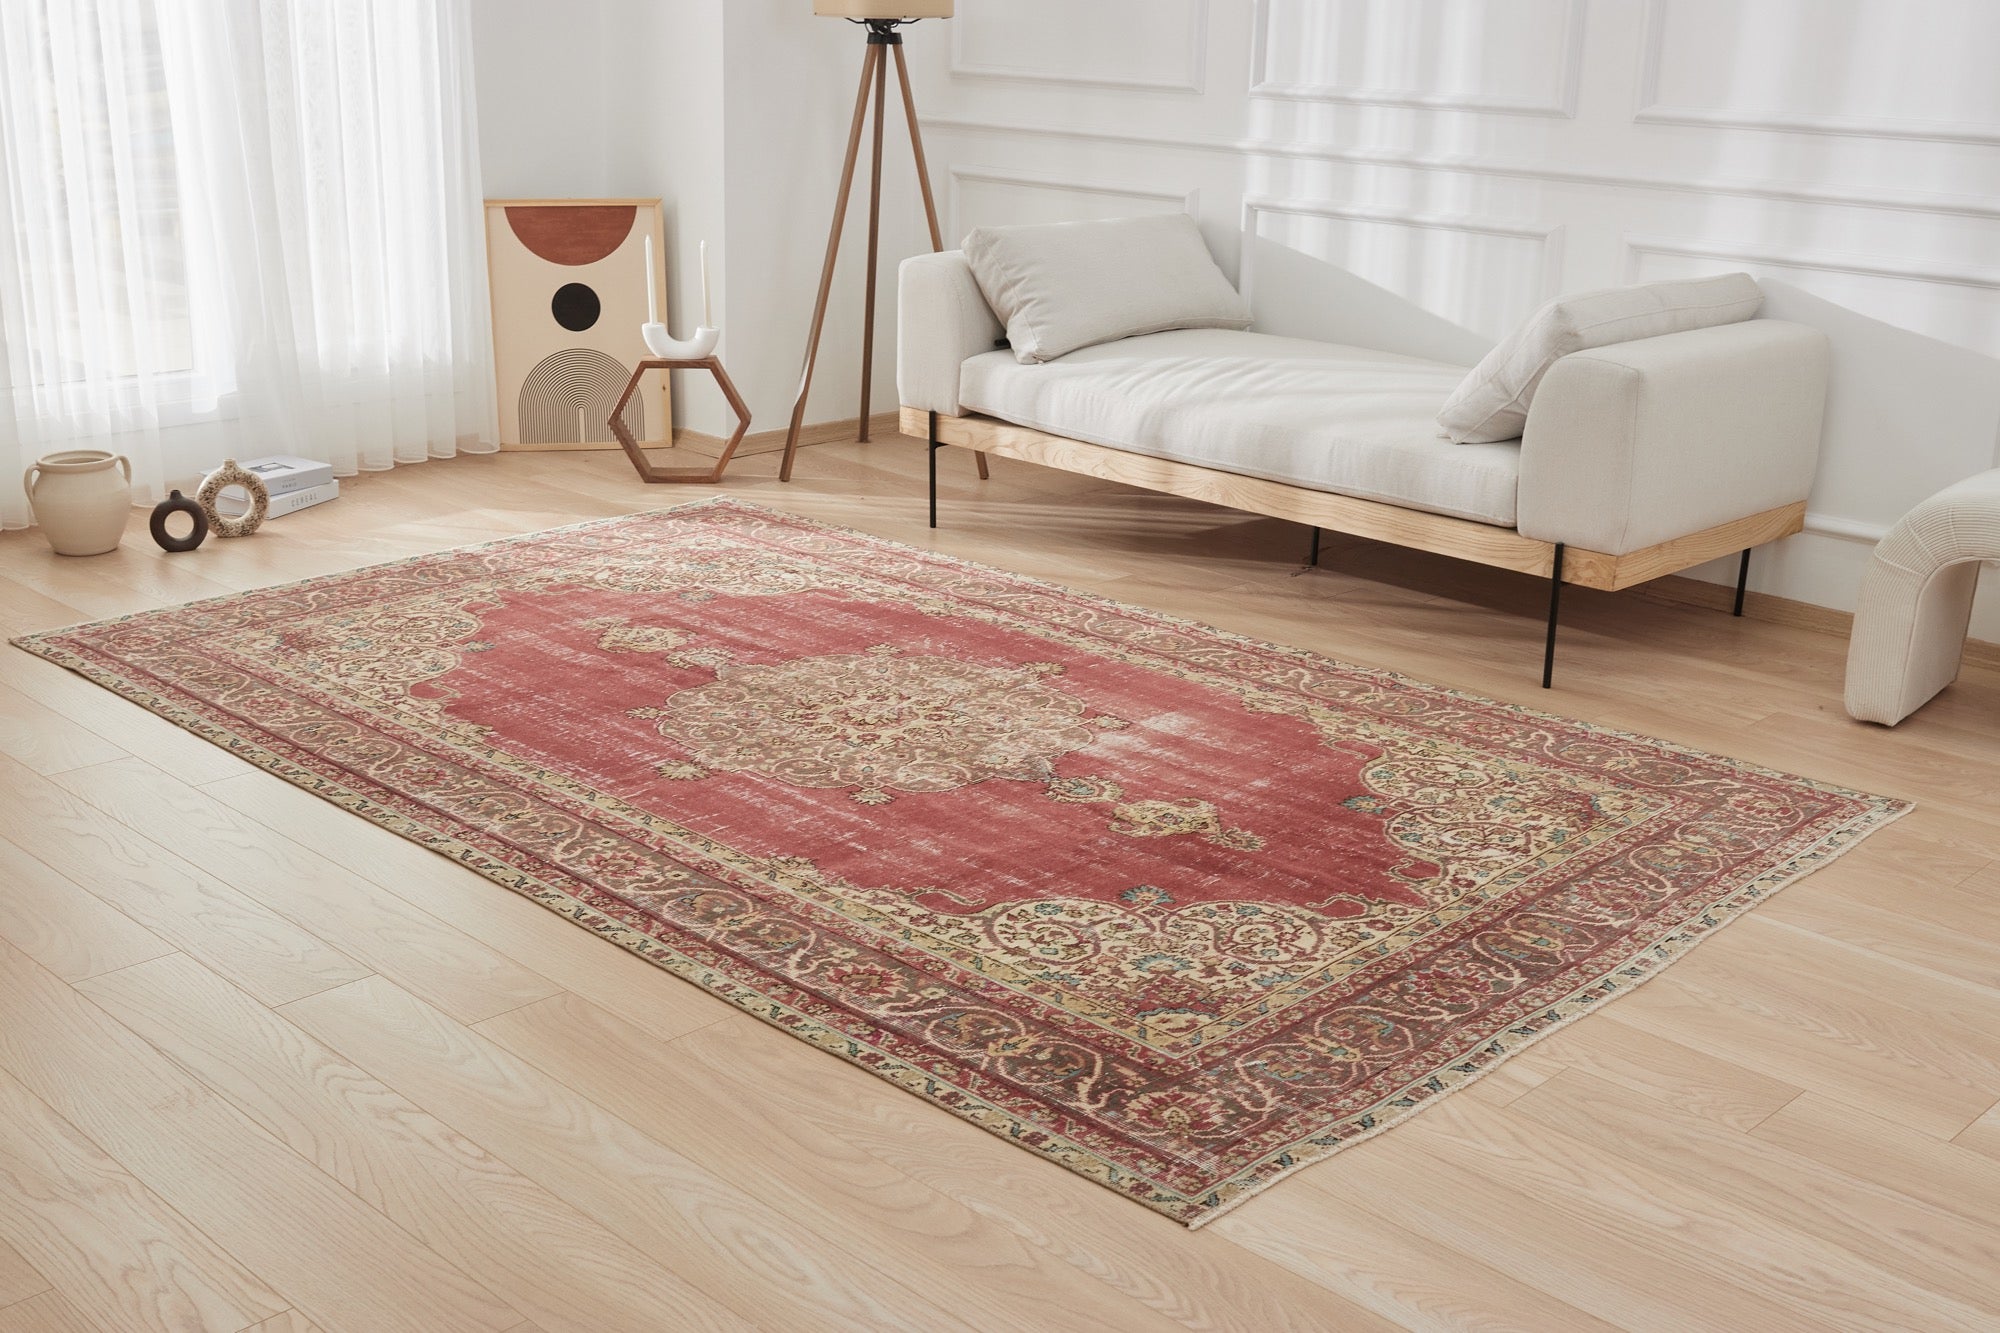 Inesila | Red Elegance | Authentic Antique washed Carpet | Kuden Rugs